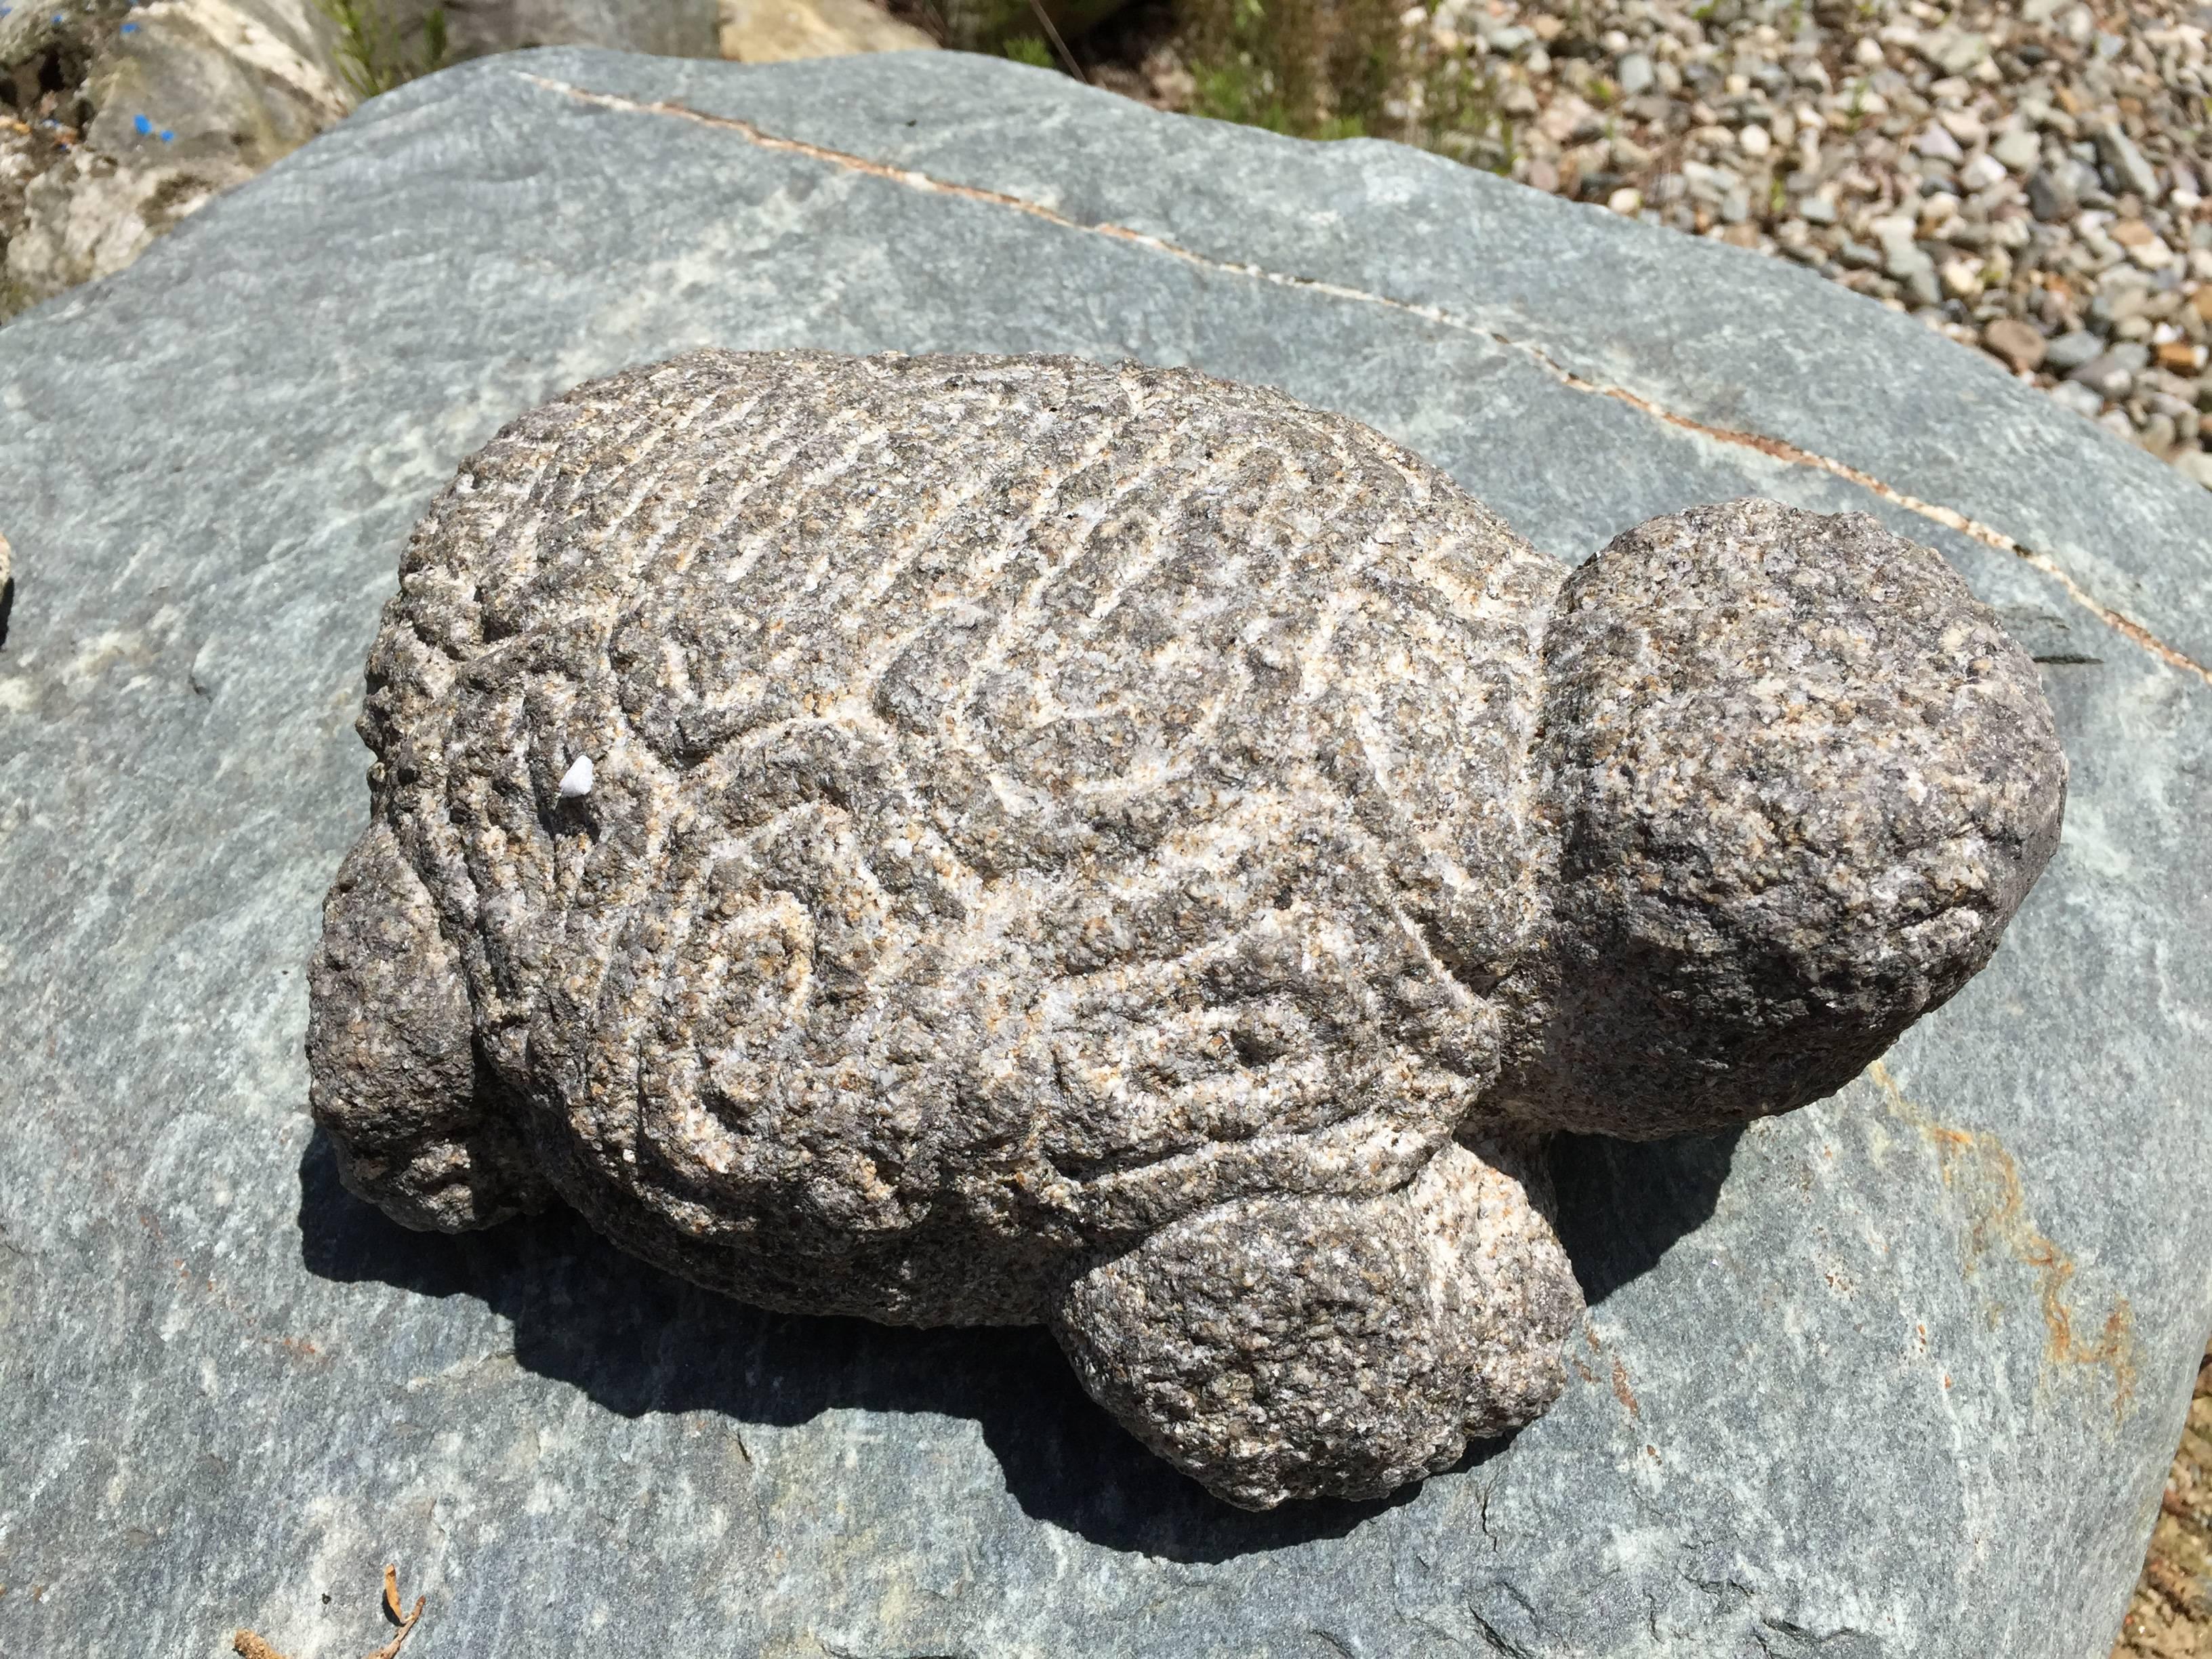 A good opportunity to acquire a rare Japanese hand-carved stone turtle 